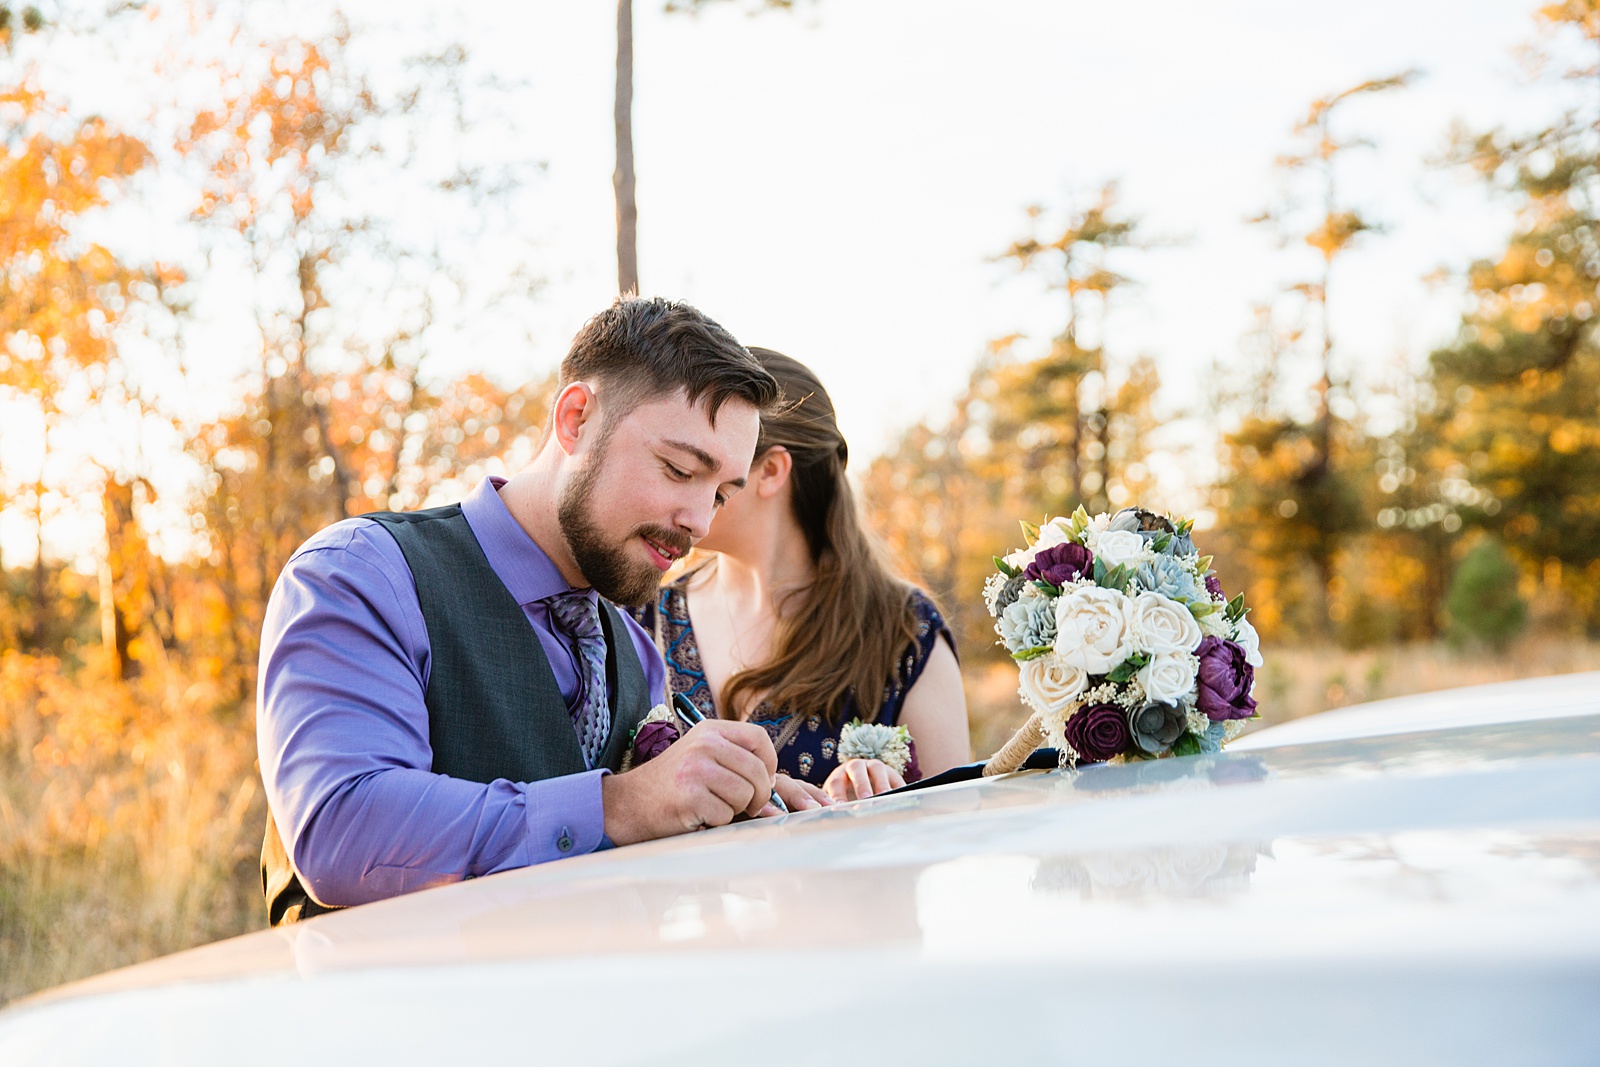 Groom signing the marriage license on after their wedding ceremony at Mogollon Rim by Payson elopement photographer PMA Photography.